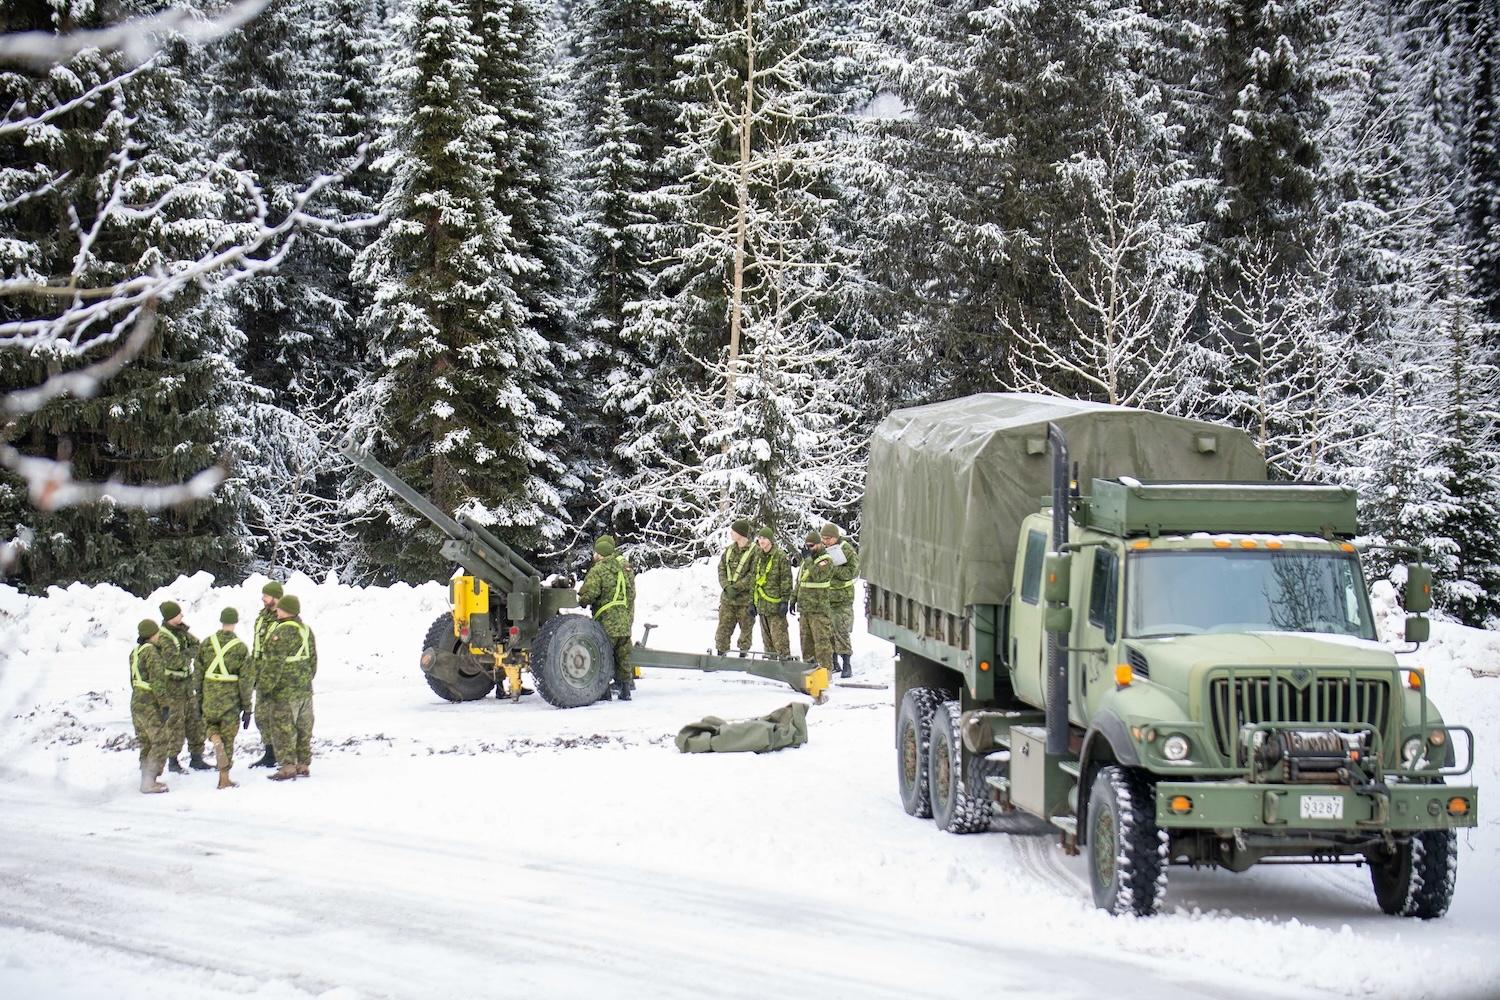 Each winter, Parks Canada and the Canadian Armed Forces work together to release avalanches in a controlled manner before they become a threat to the transportation corridor.